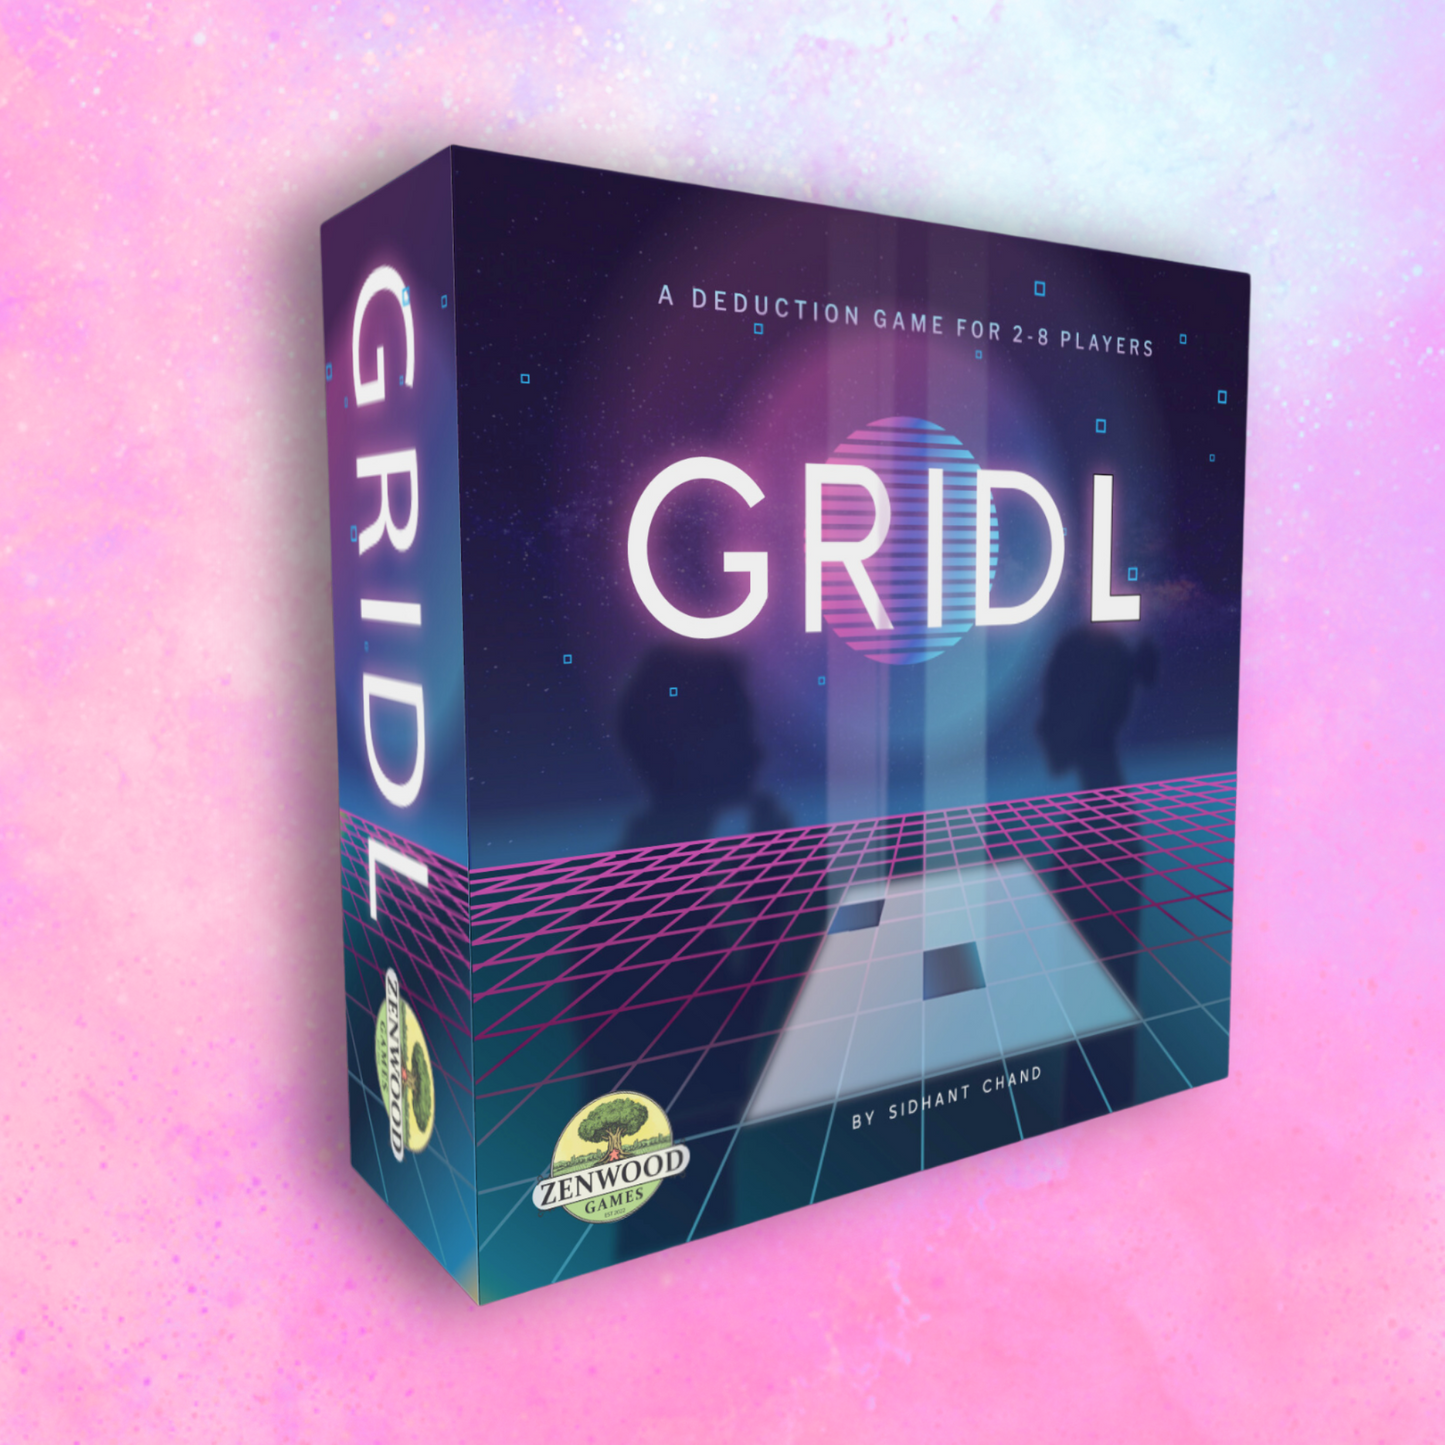 GridL - An Abstract Deduction Game